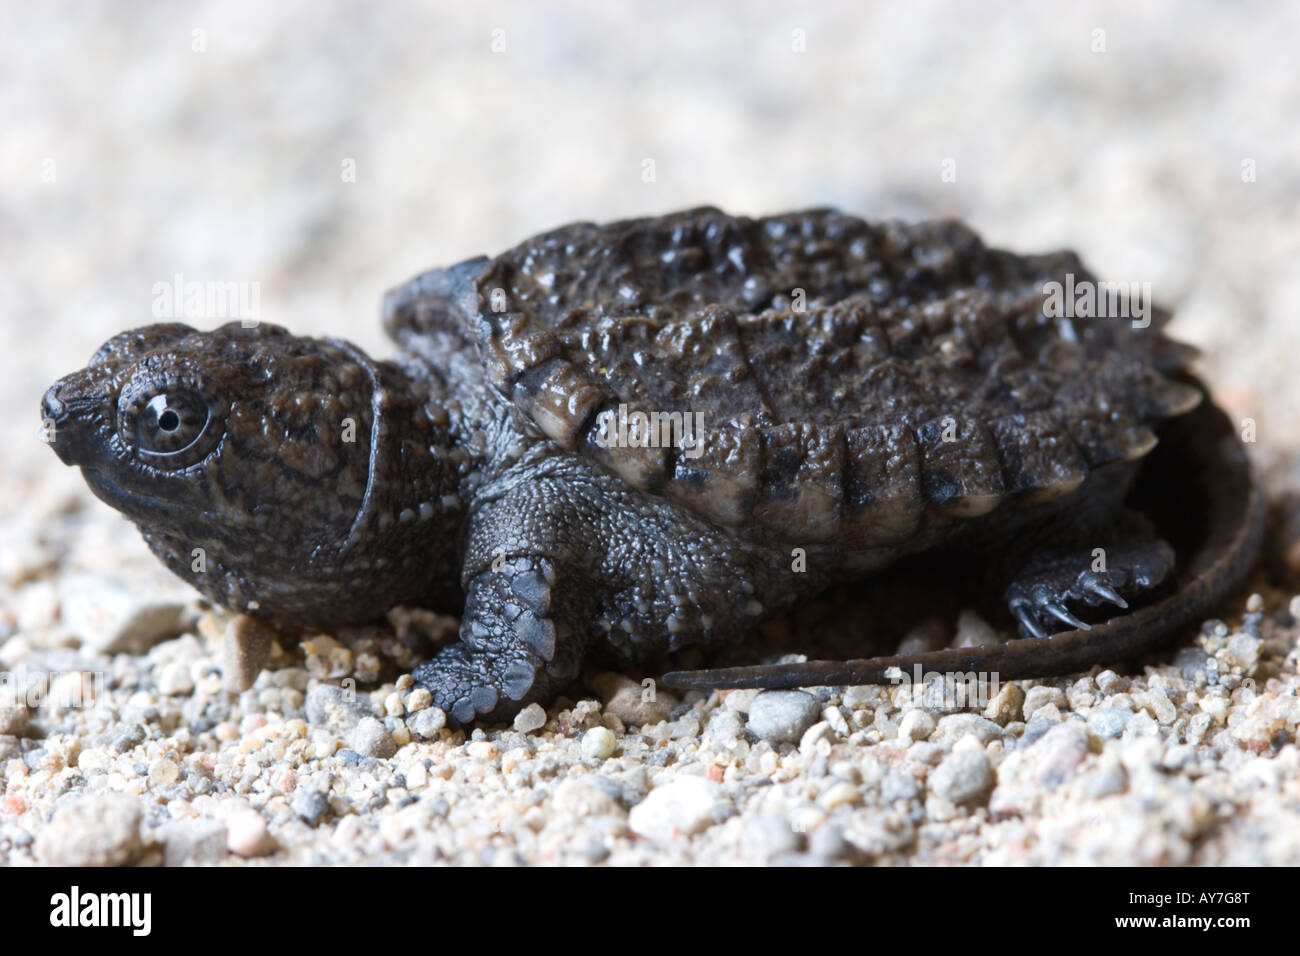 baby snapping turtle Stock Photo